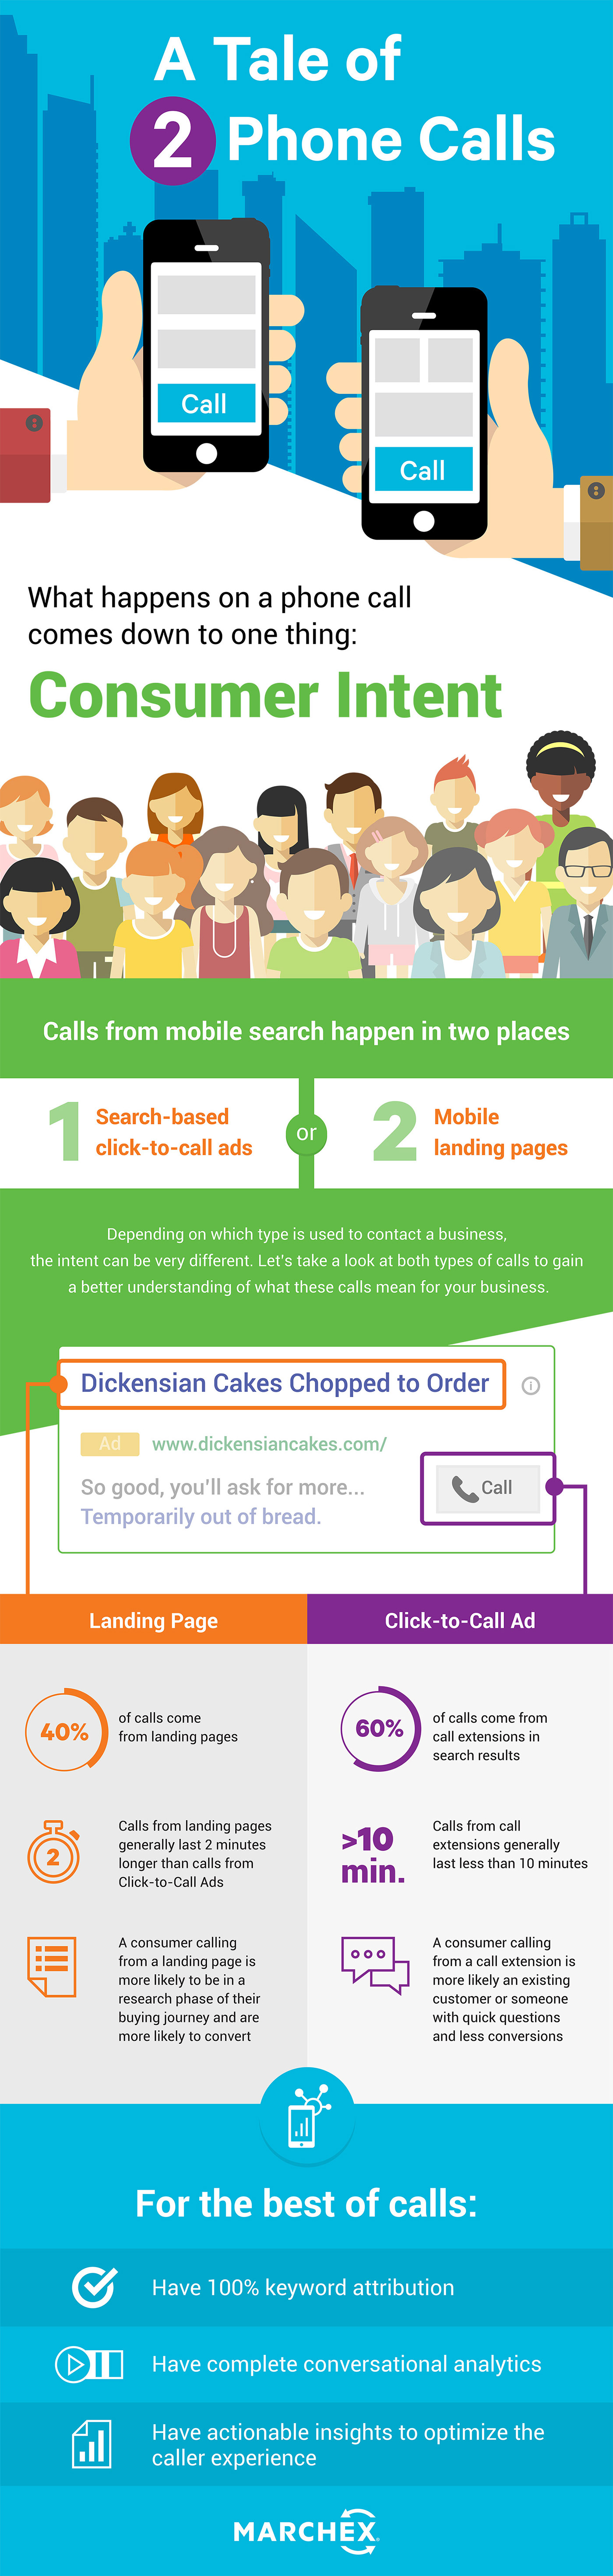 infographic mobile phone click-to-call landing page